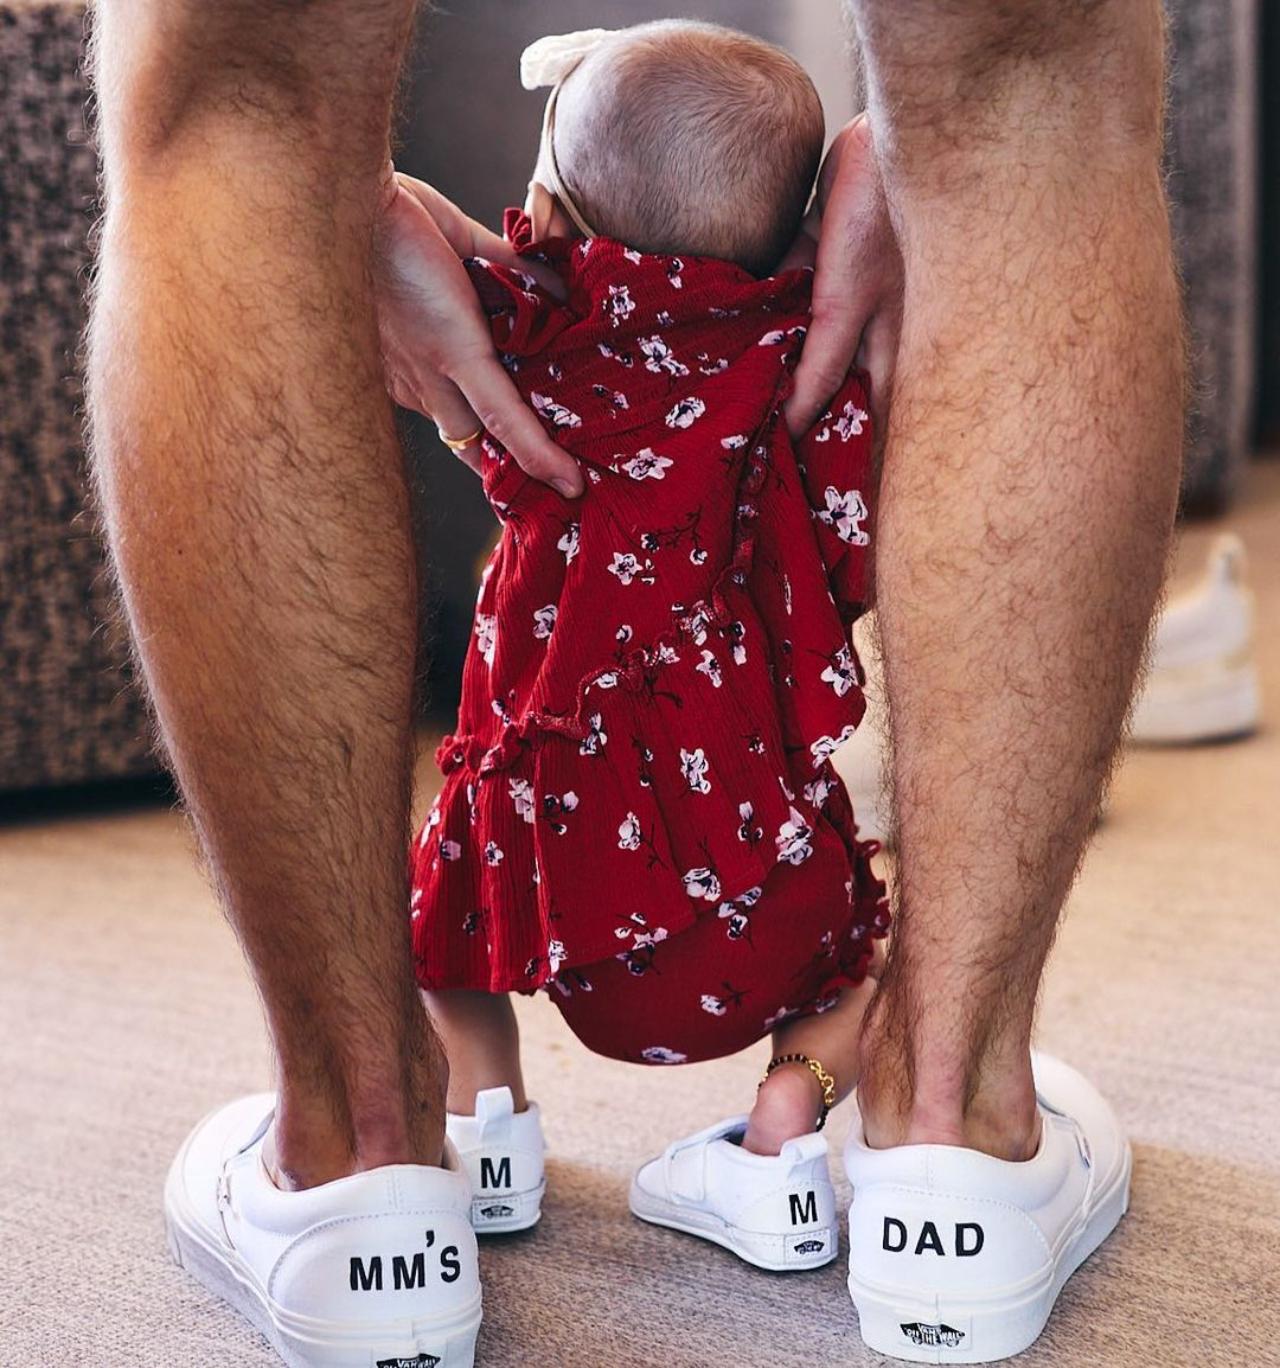 On the occasion of Father's Day, Priyanka gifted Nick Jonas and their daughter, customized sneakers. The actress also shared an adorable picture of Nick and Malti Marie in the sneakers. In the picture, the father-daughter duo is standing with their back towards the camera. Malti Marie looks cute in a maroon dress paired with white sneakers with her name acronym 